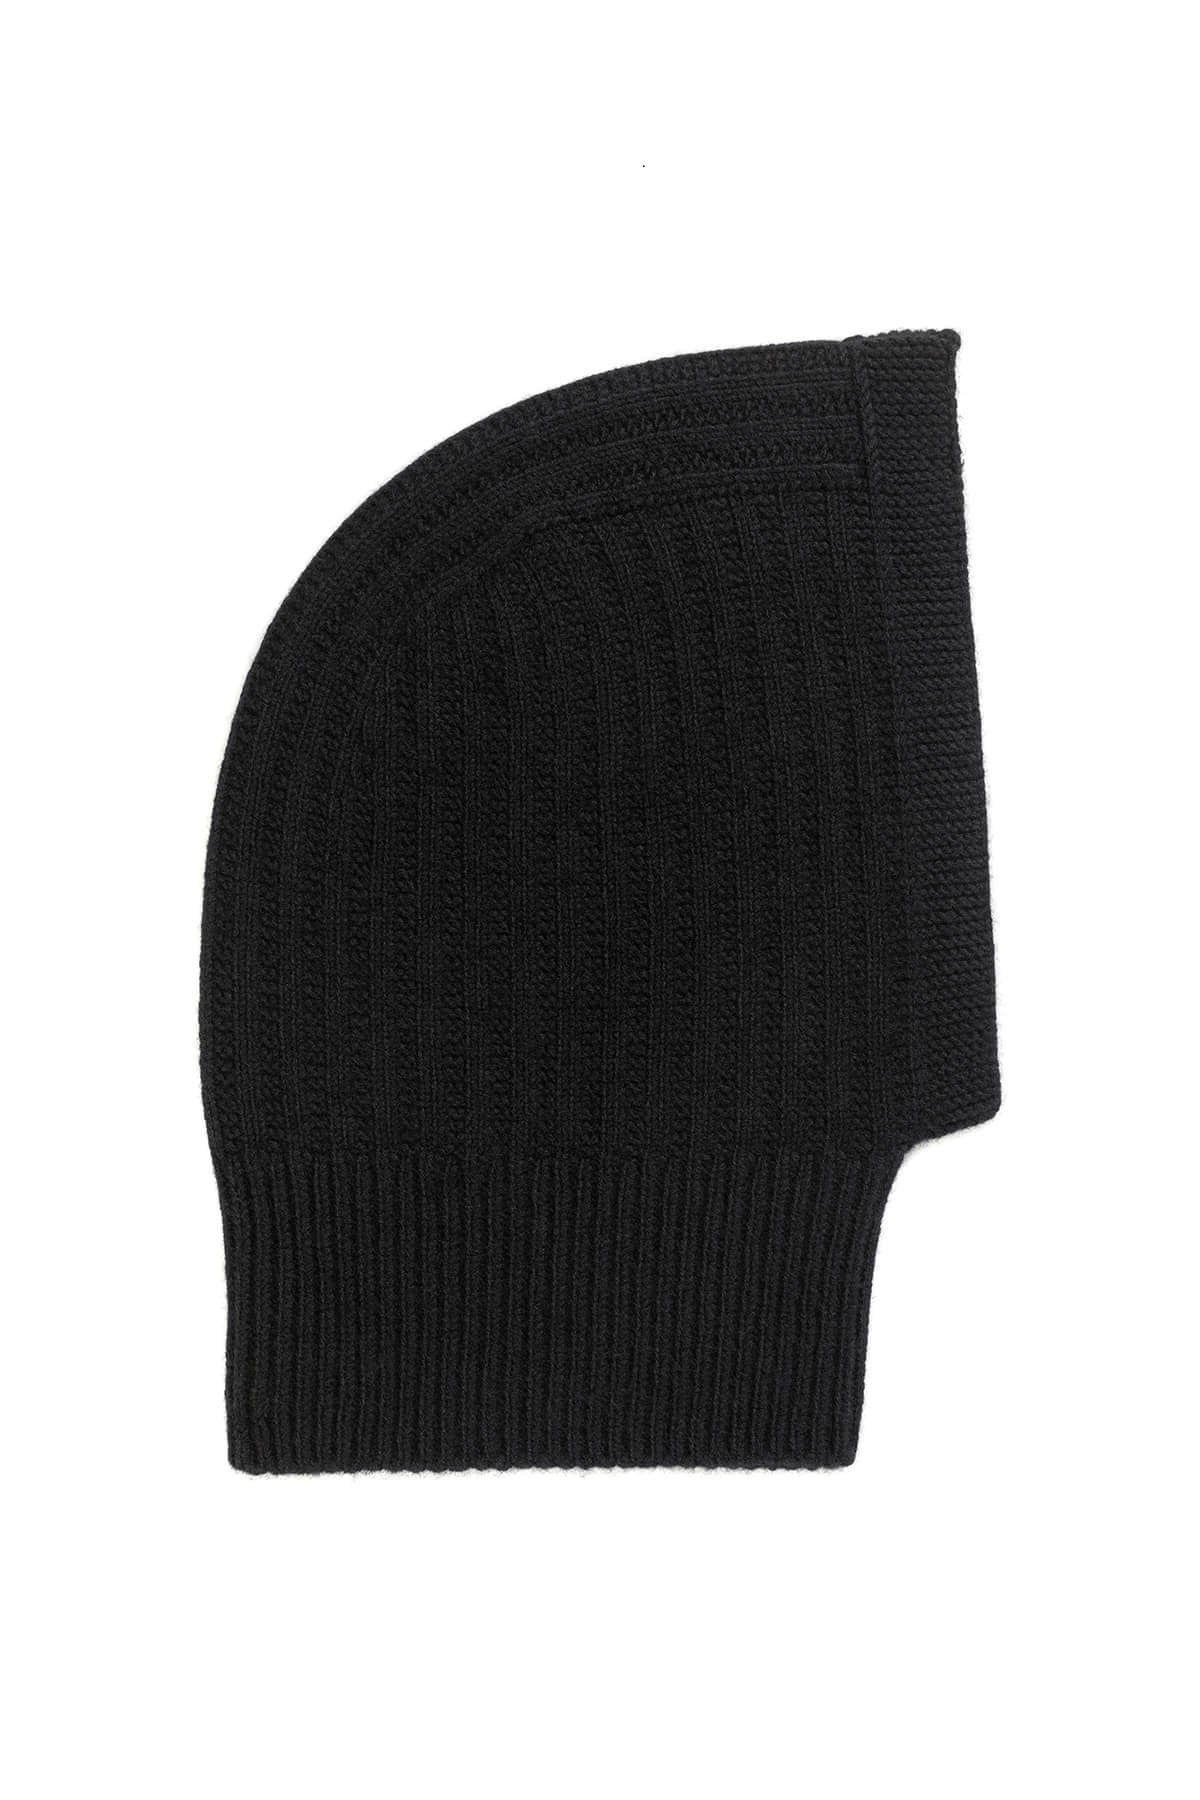 Johnstons of Elgin’s Black Cashmere Textured Rib Hood Snood on a white background HAY03313SA0900